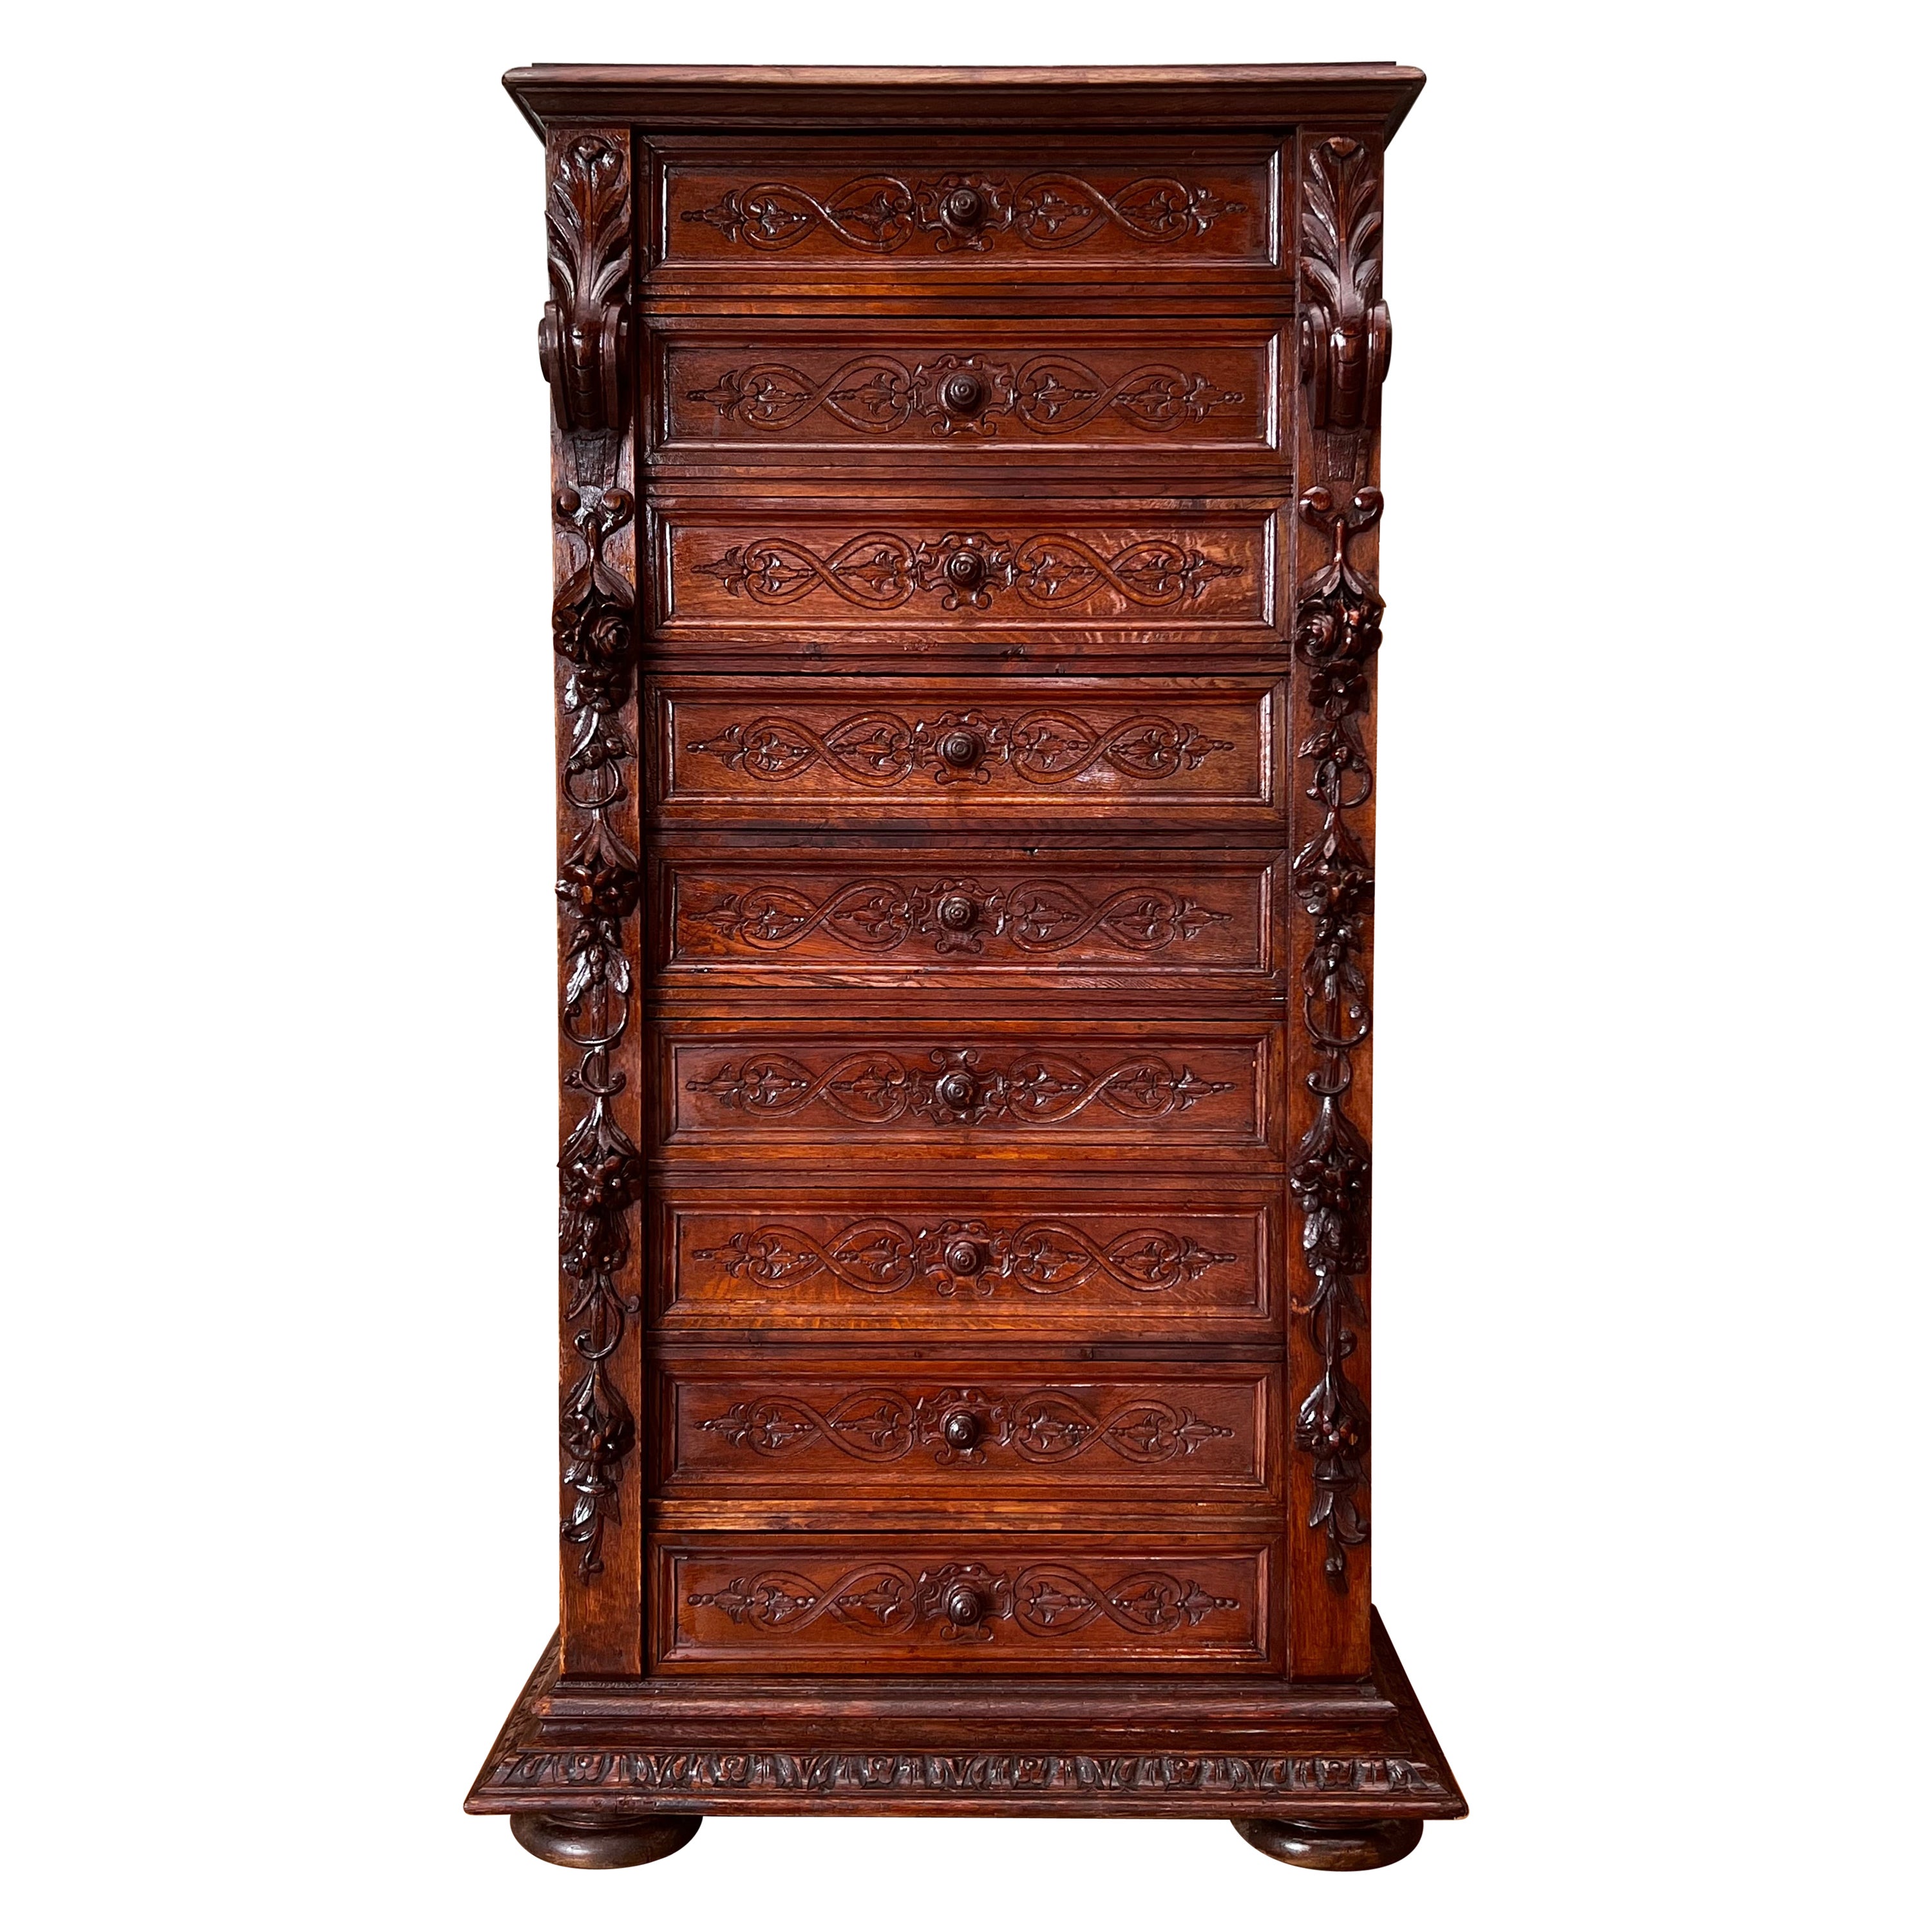 Late 19th Walnut Nine Drawer Tall French Carved Chest or Siffonier